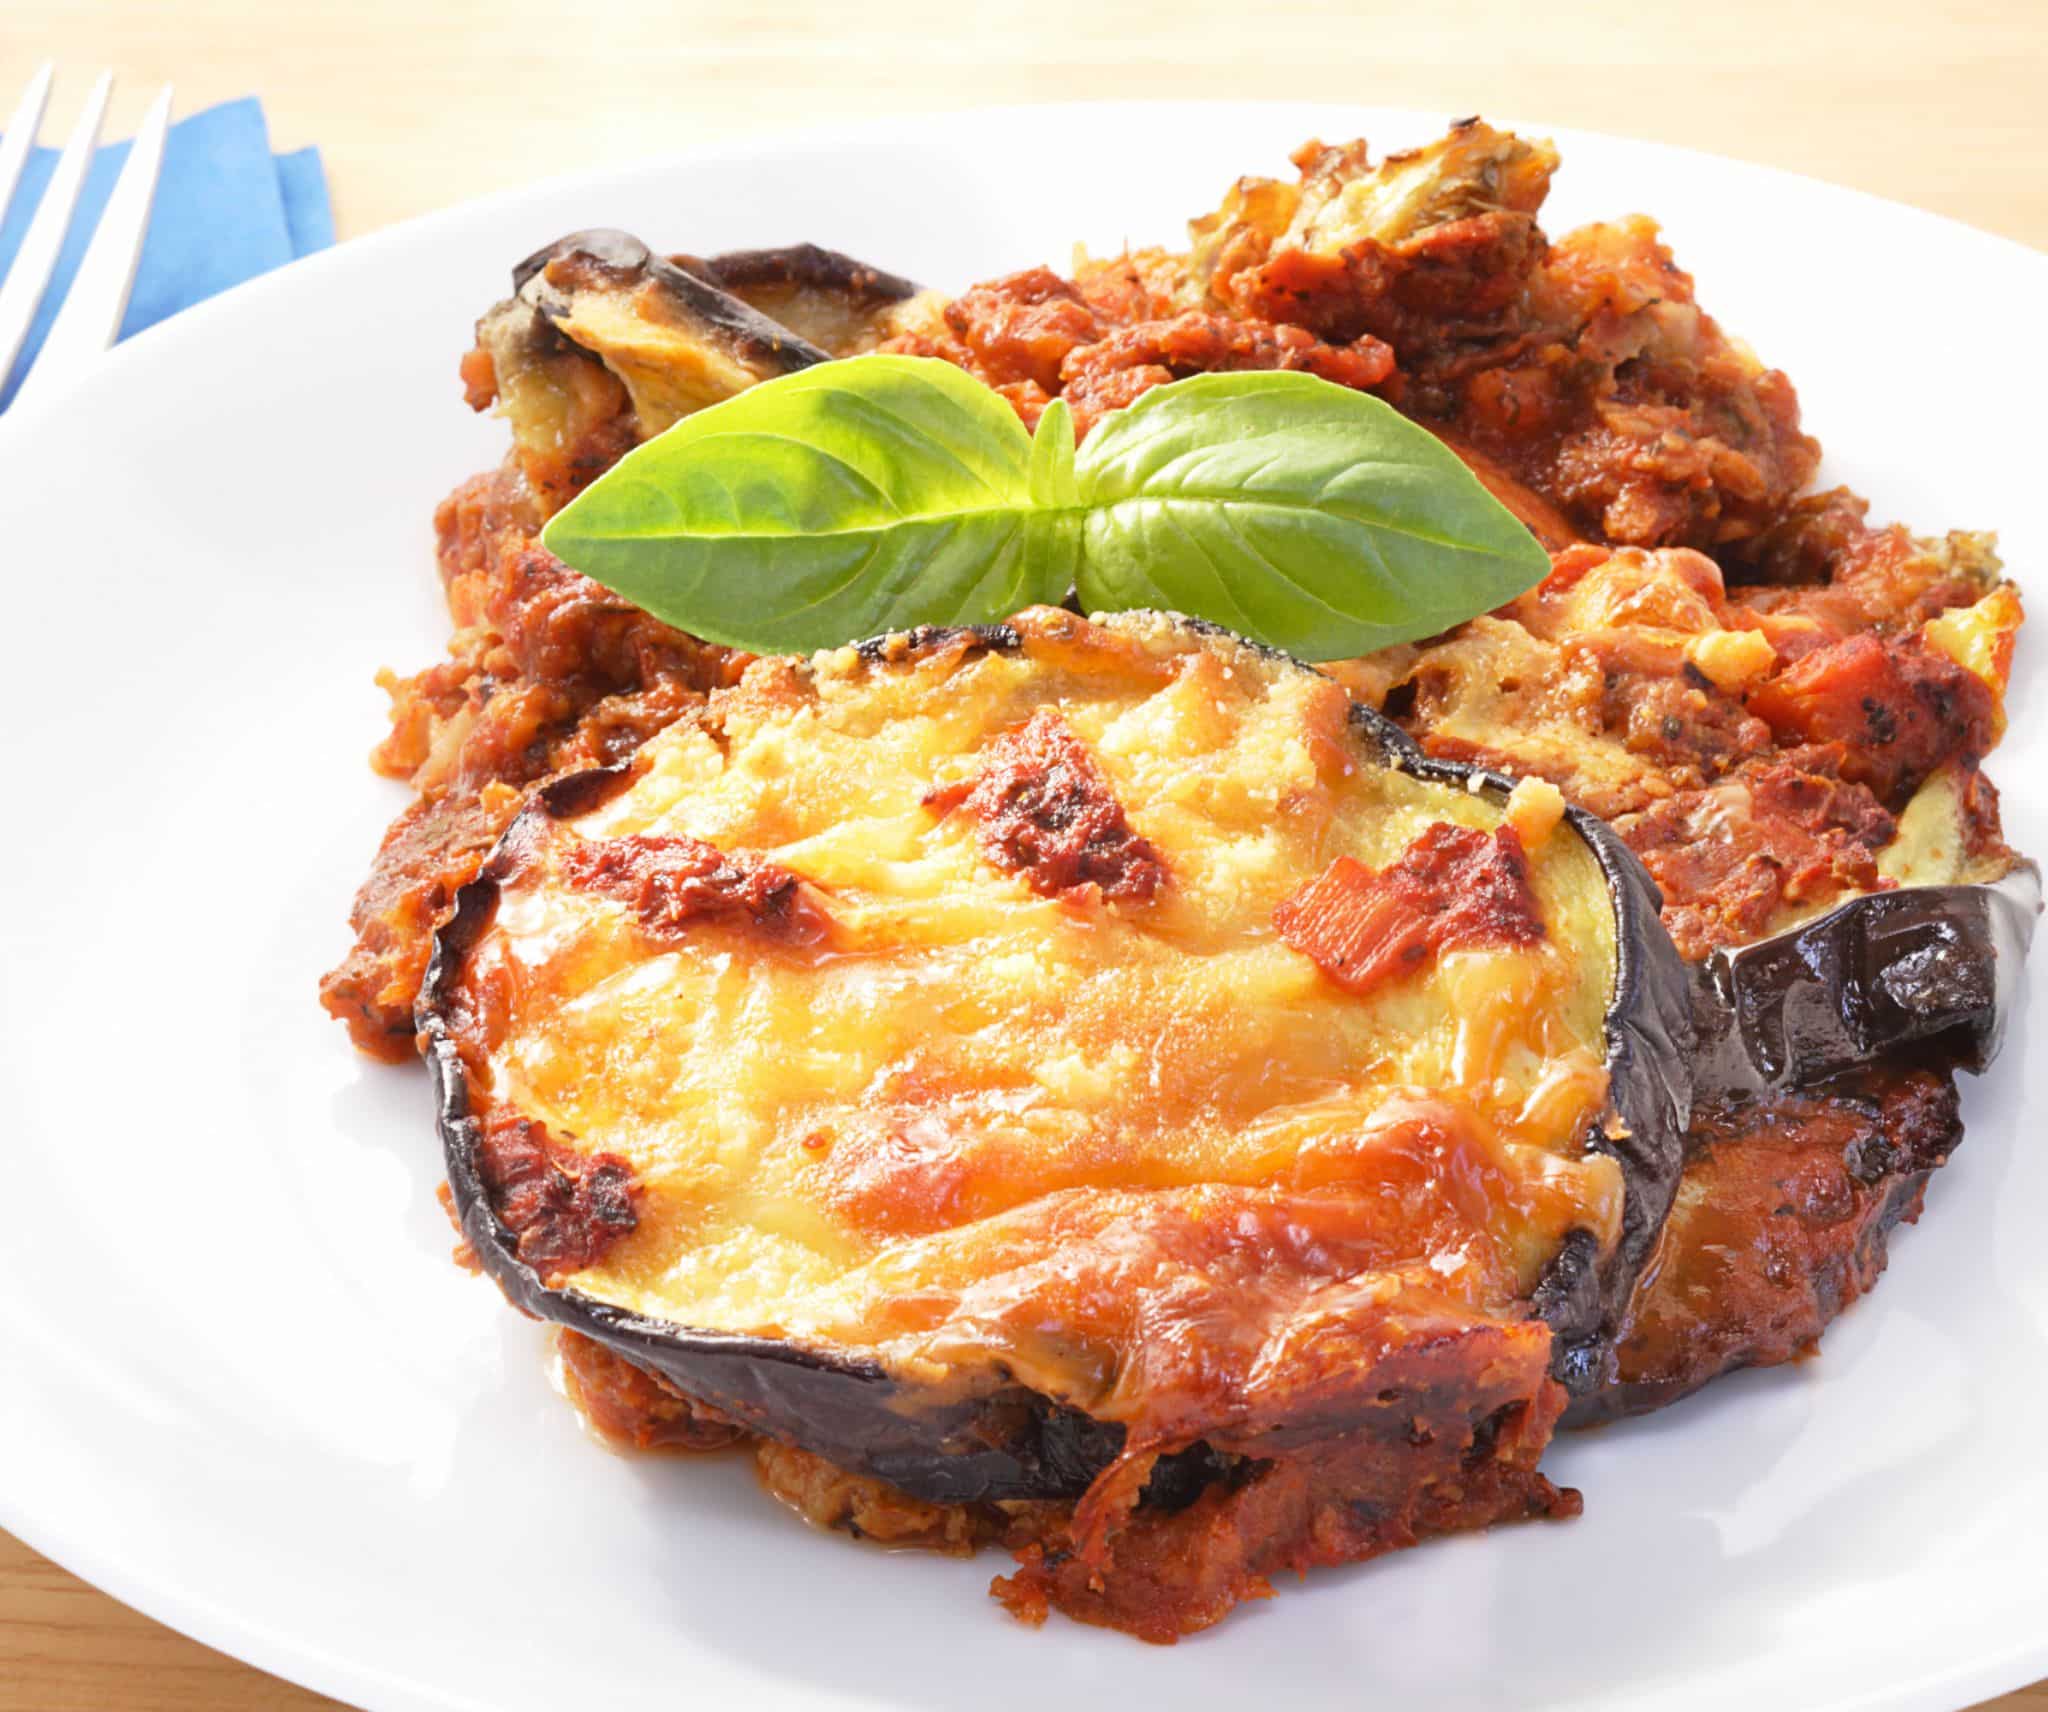 What To Serve With Eggplant Parmesan